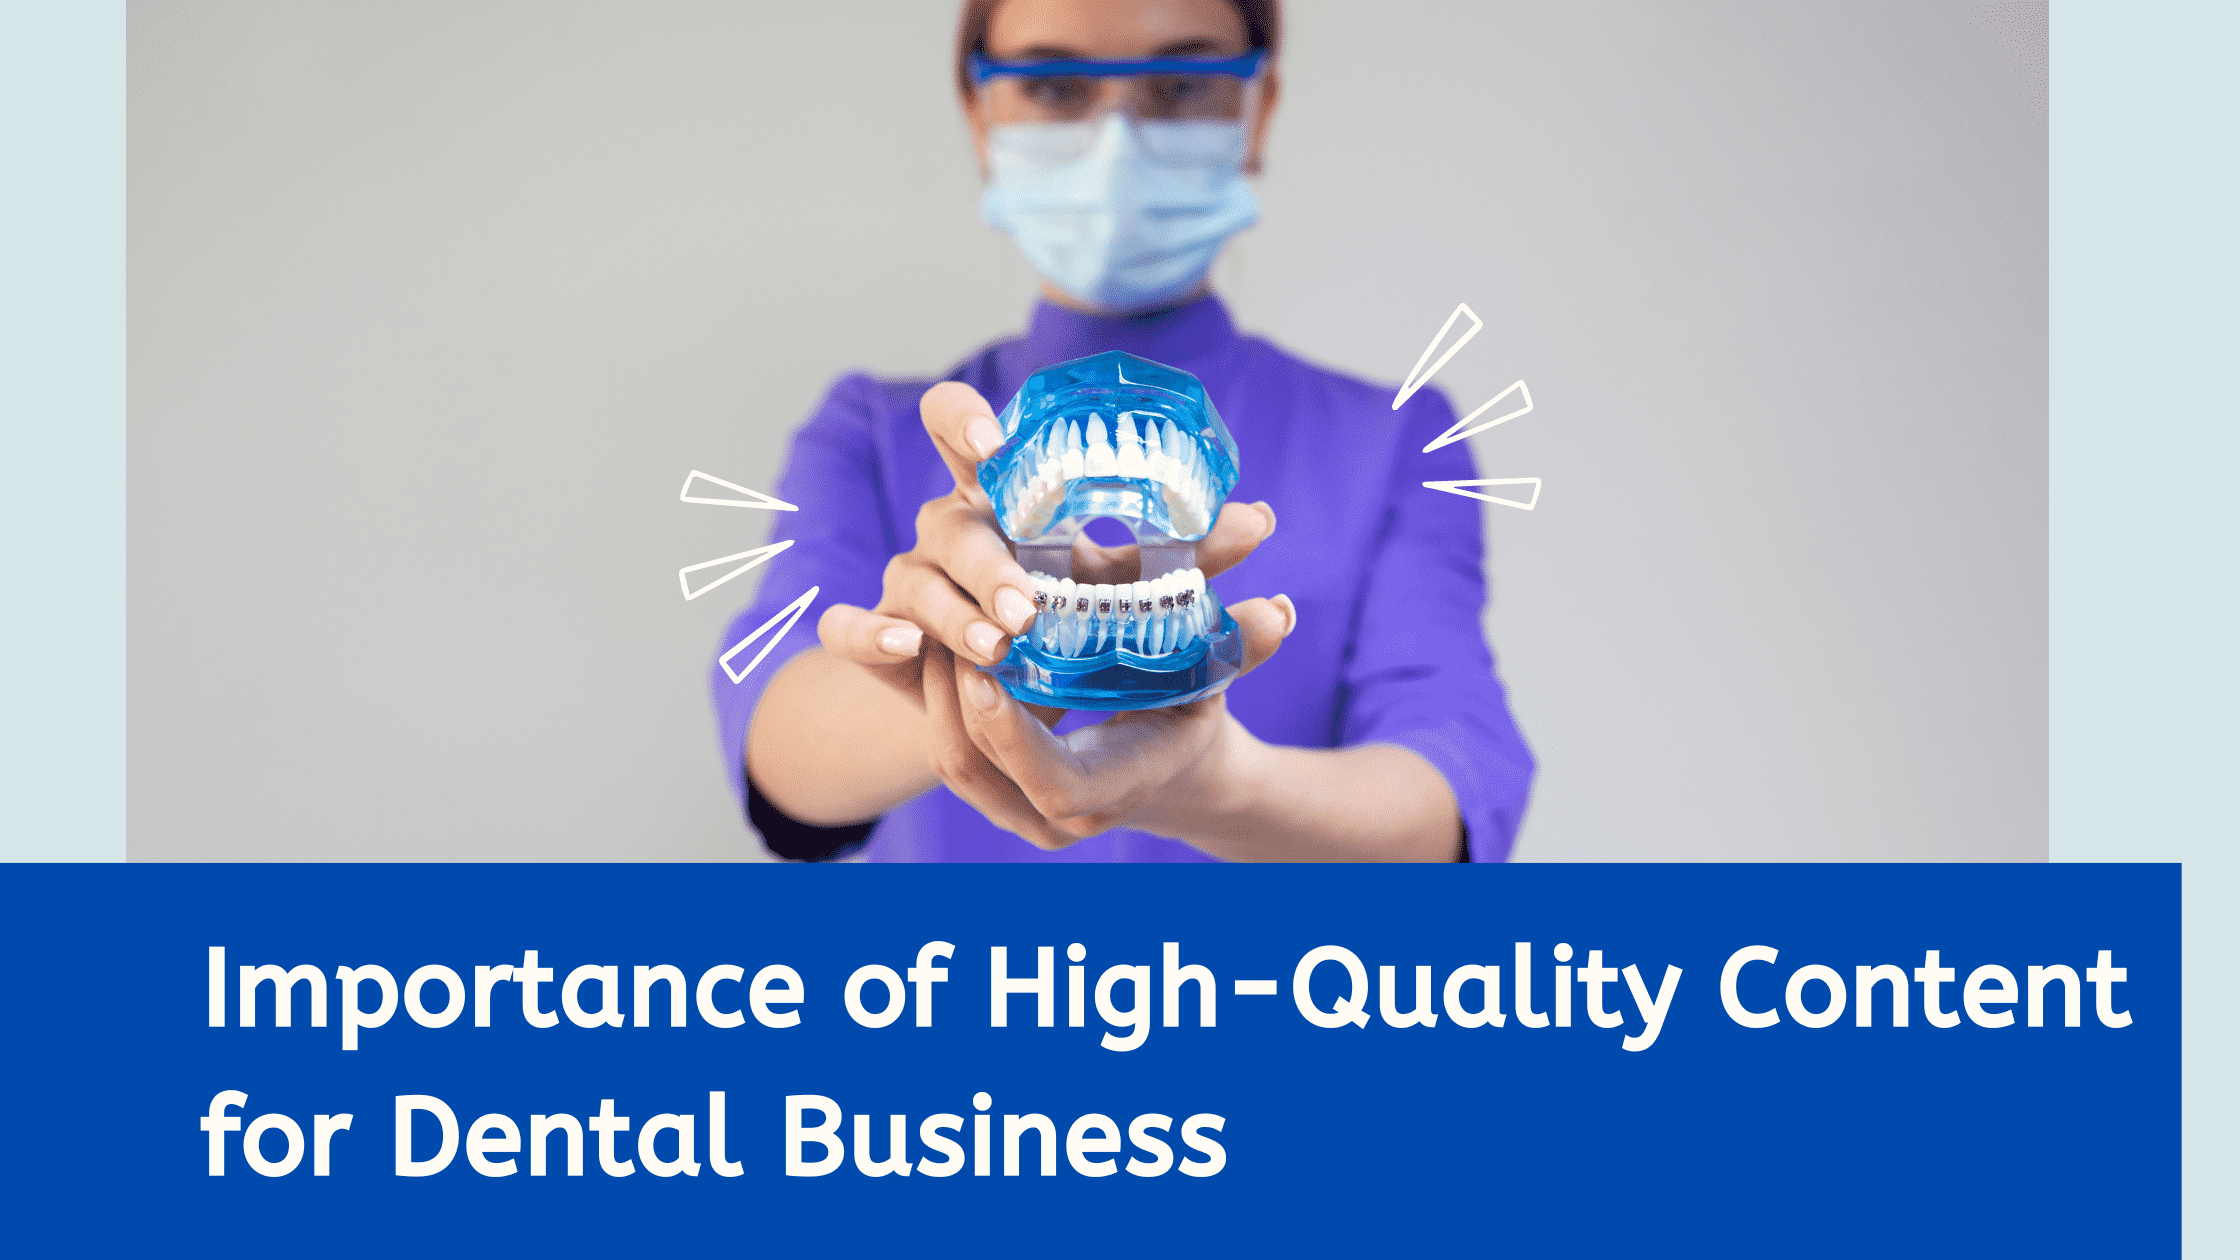 Importance of High-Quality Content for Dental Business